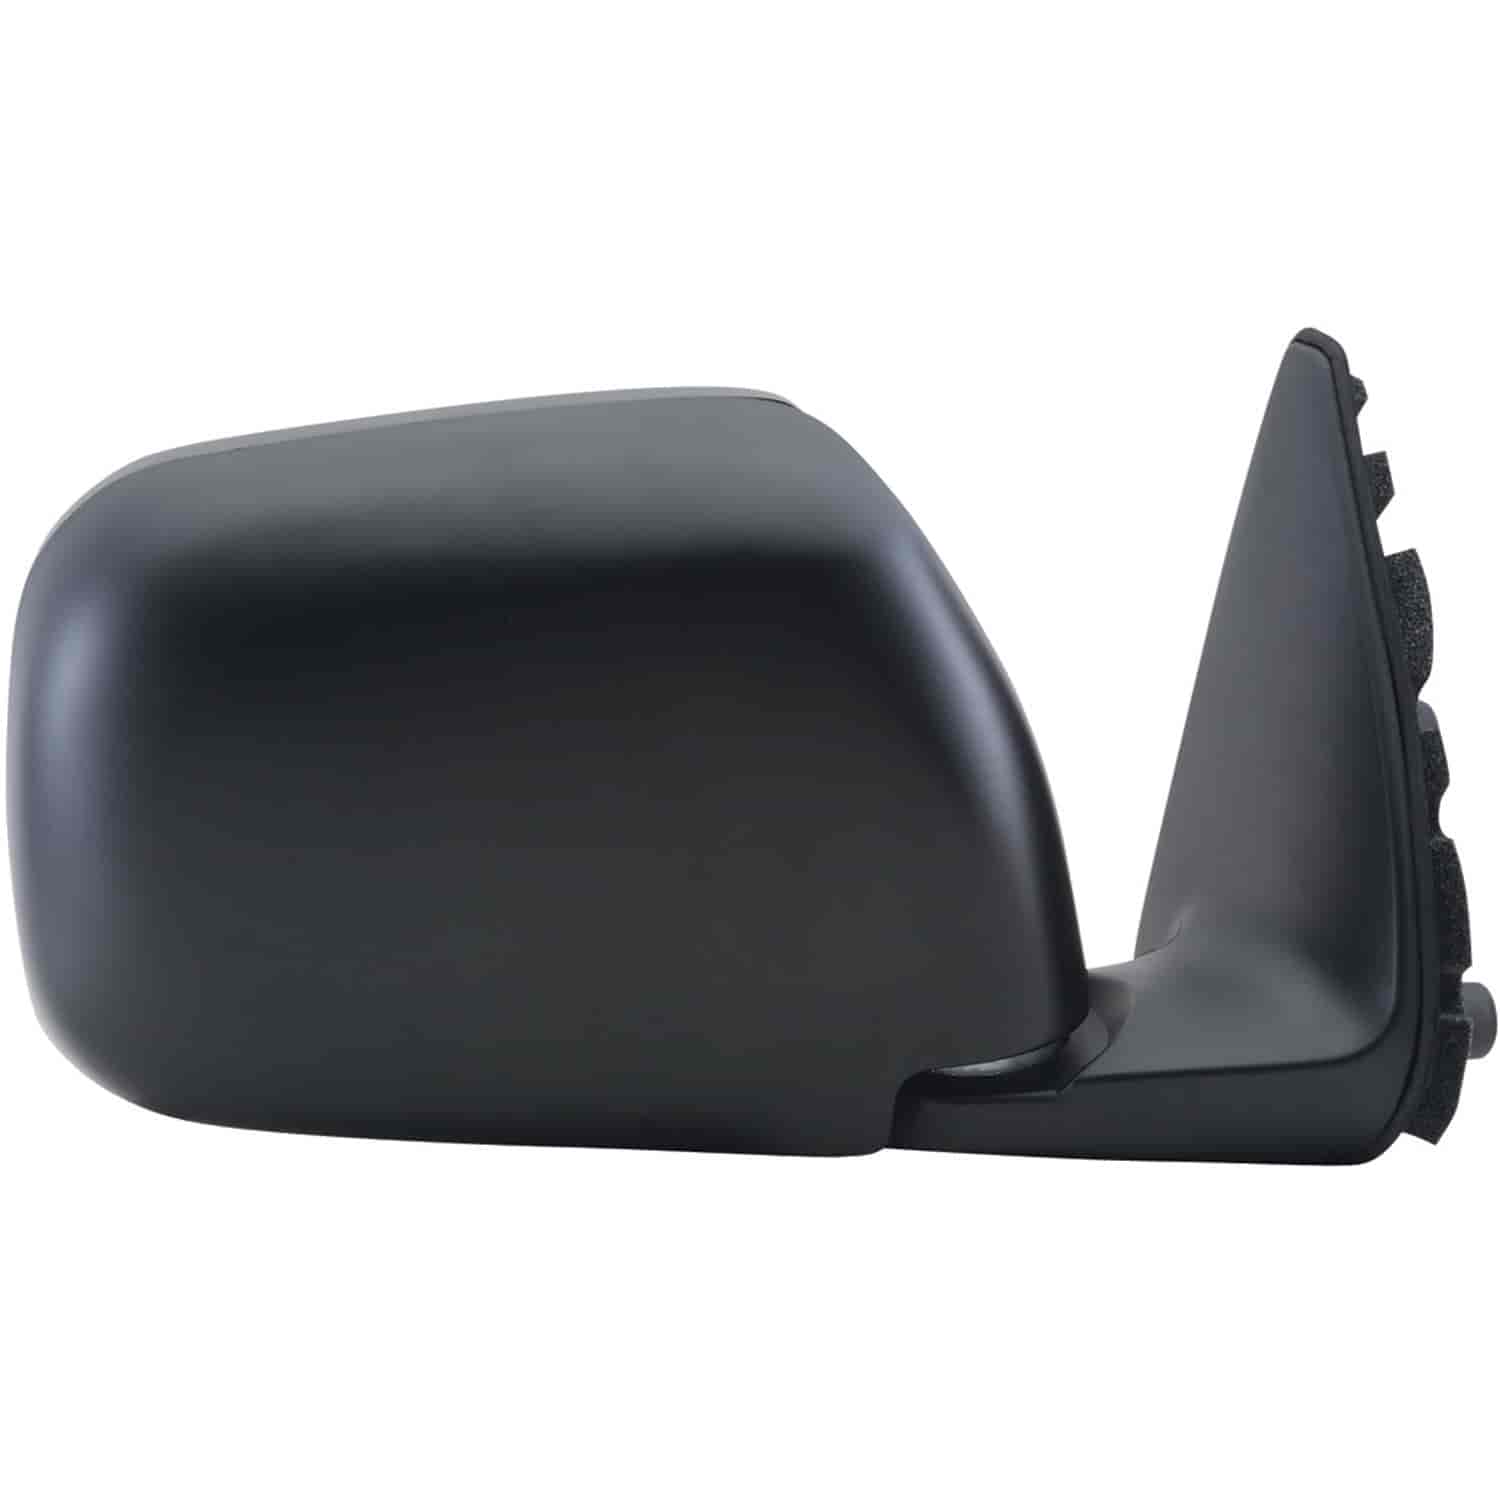 OEM Style Replacement mirror for 96-98 Toyota T-100 Pick-Up passenger side mirror tested to fit and